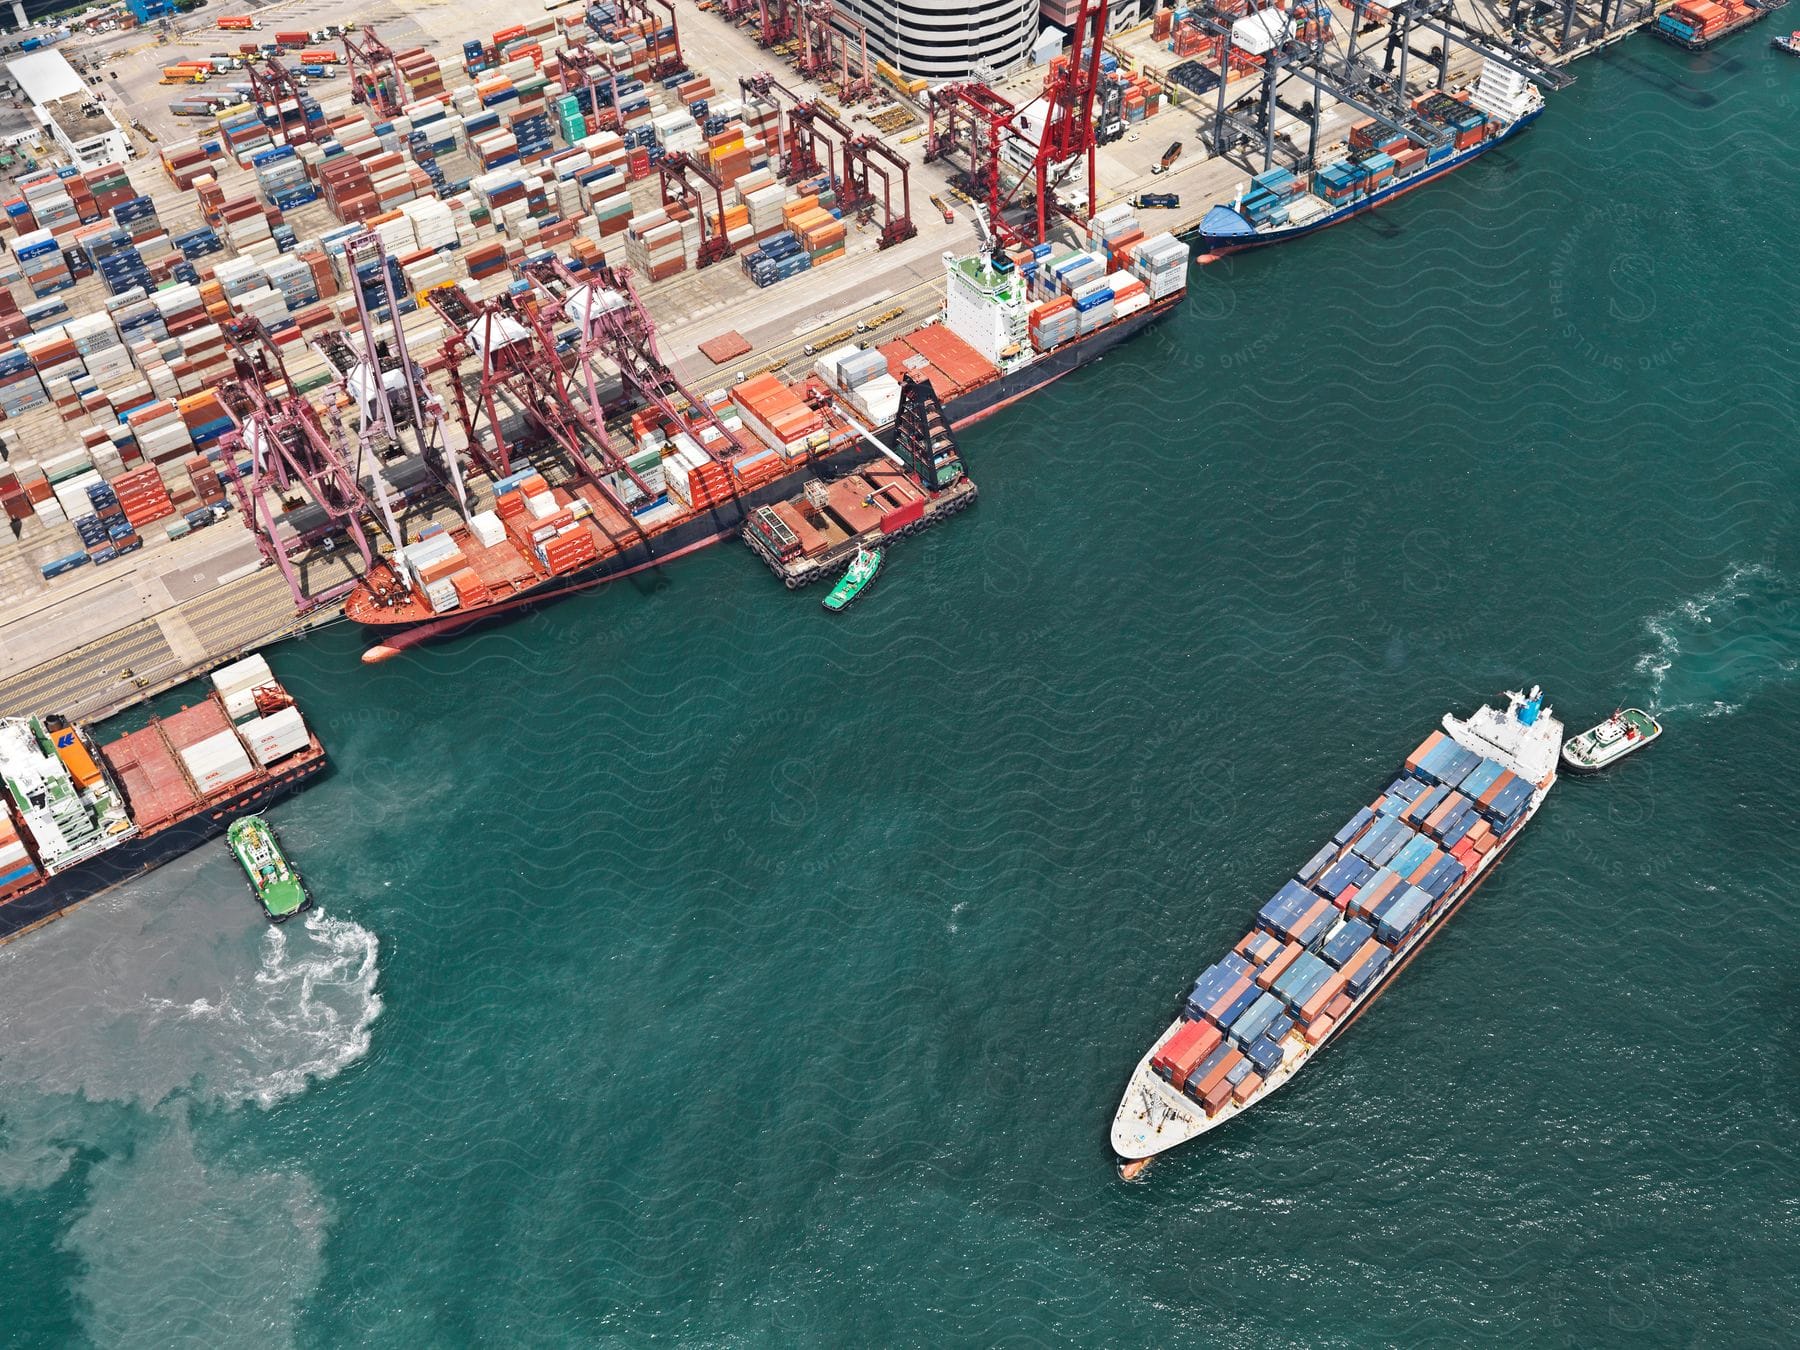 An aerial perspective of a cargo ship with shipping containers entering a port where cranes are unloading the containers